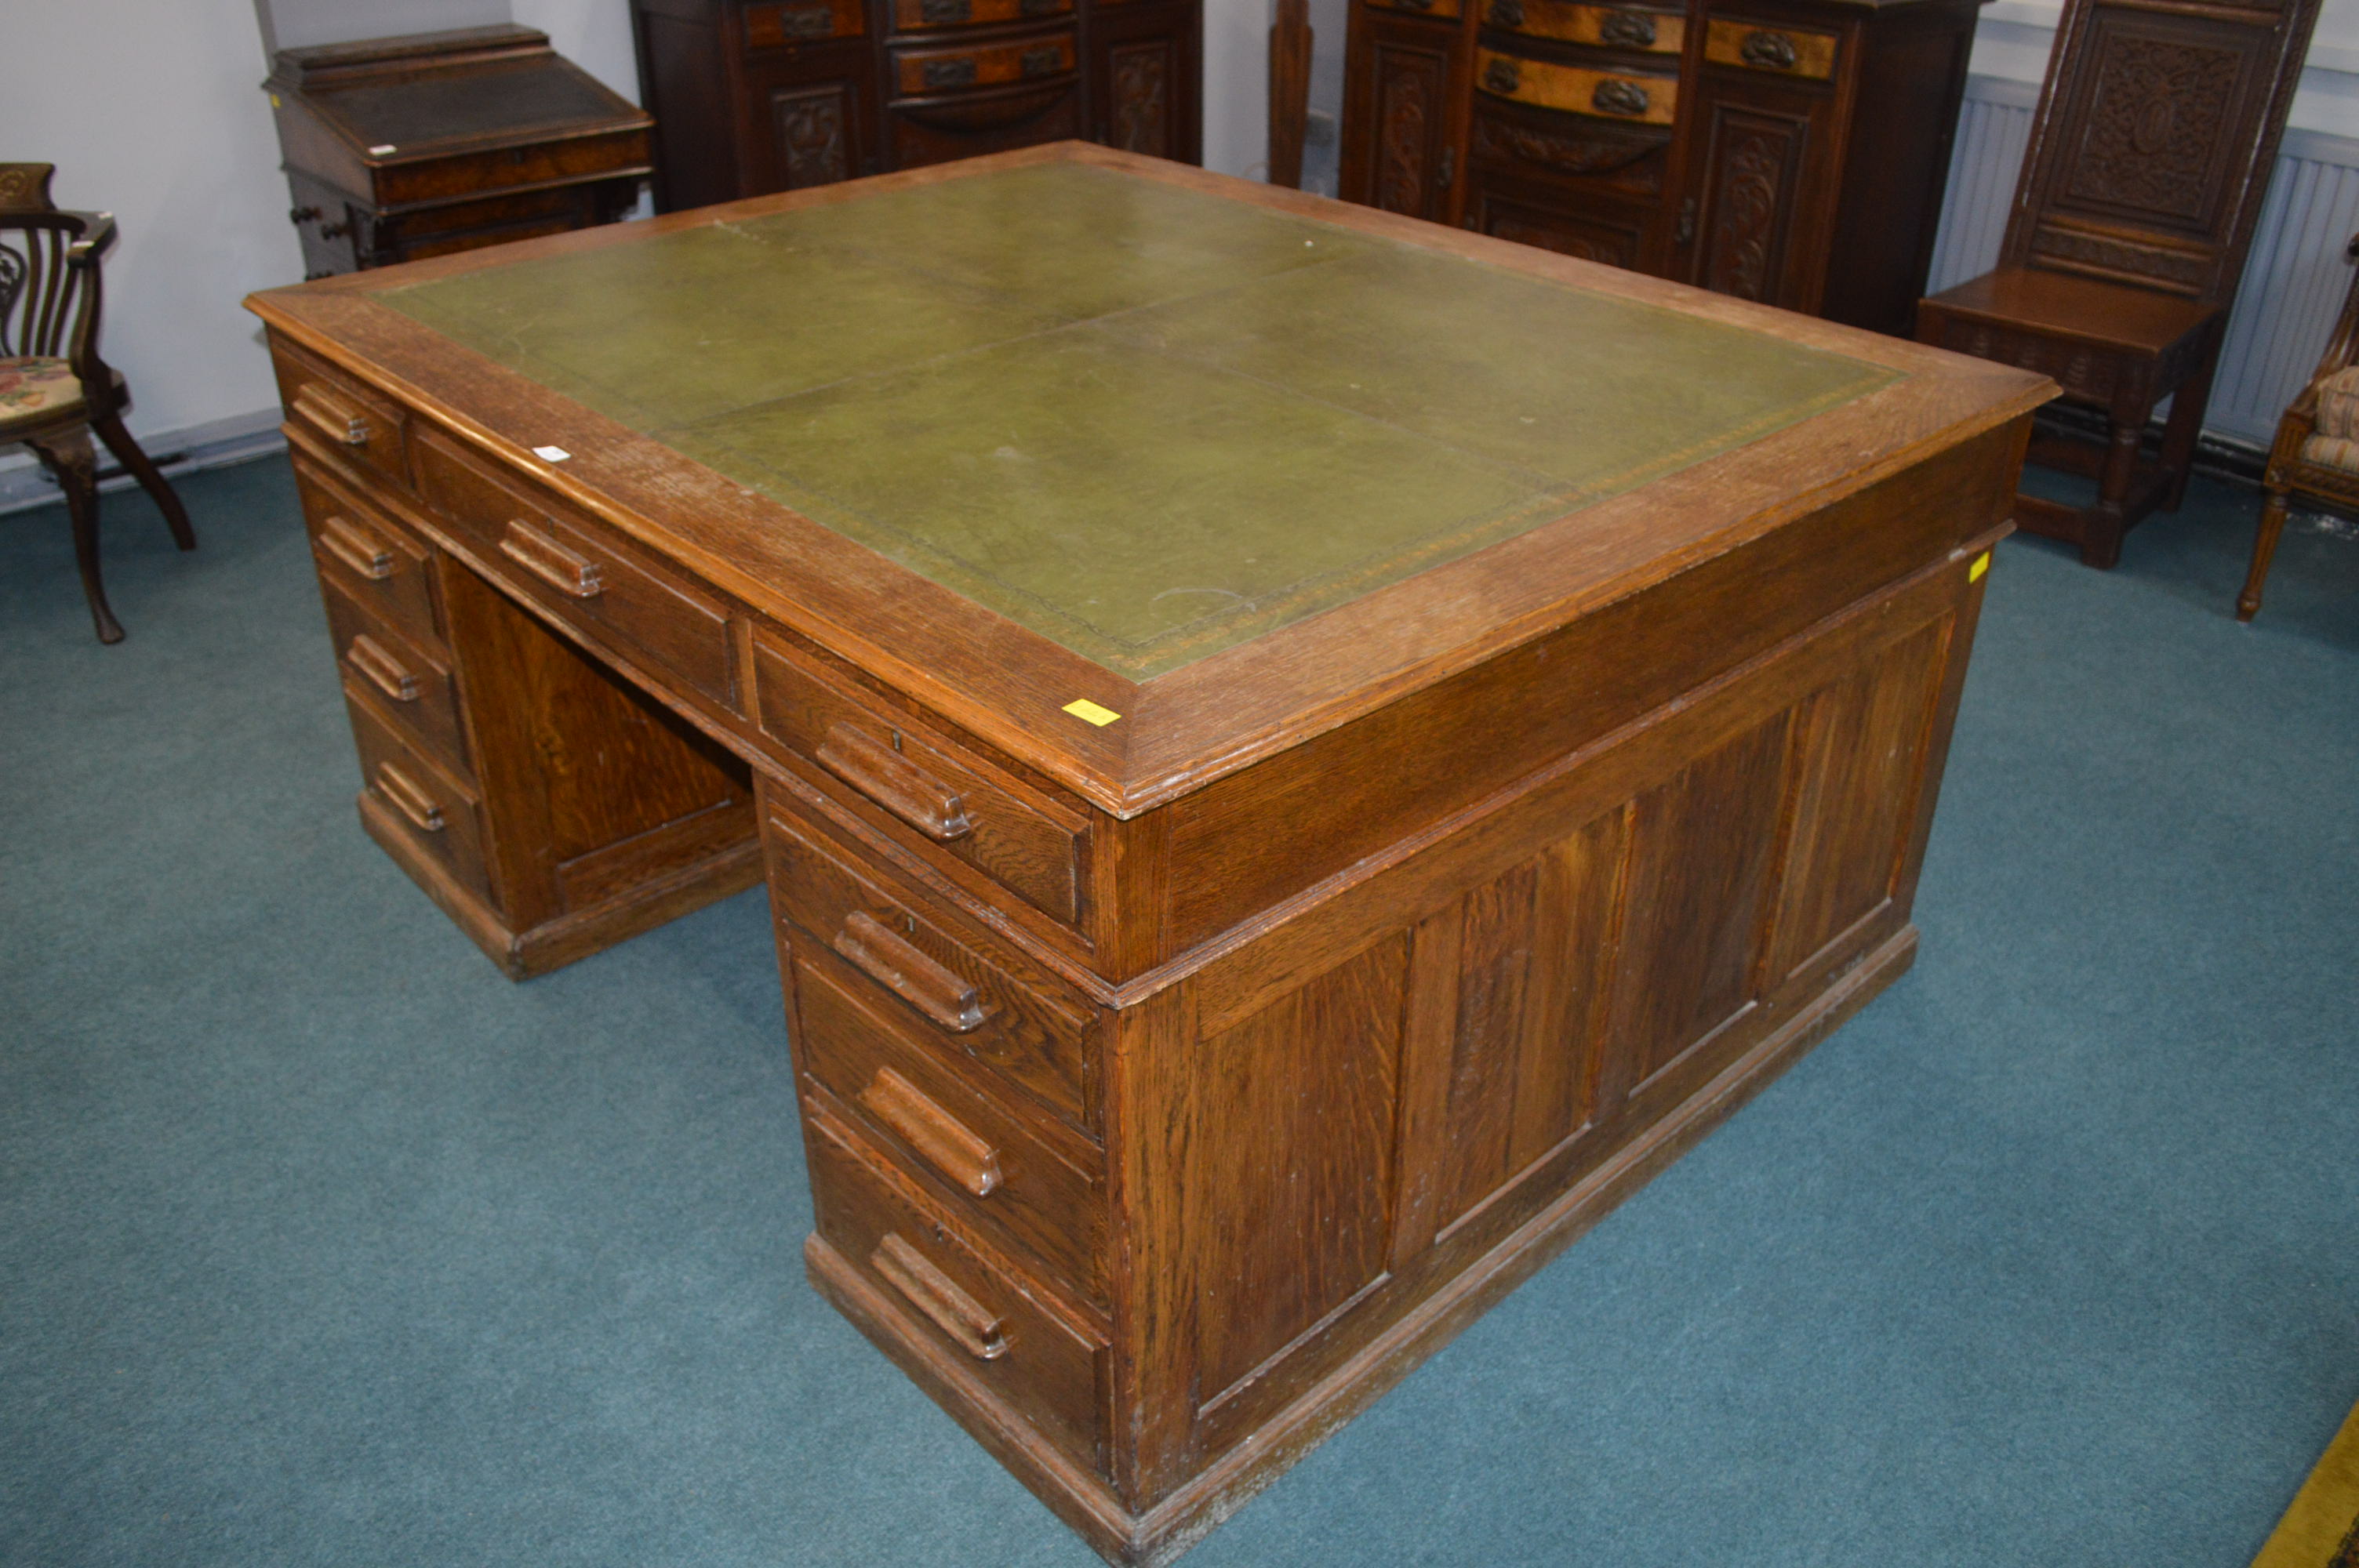 Large Oak Partners Desk with Green Tooled Leather - Image 2 of 4